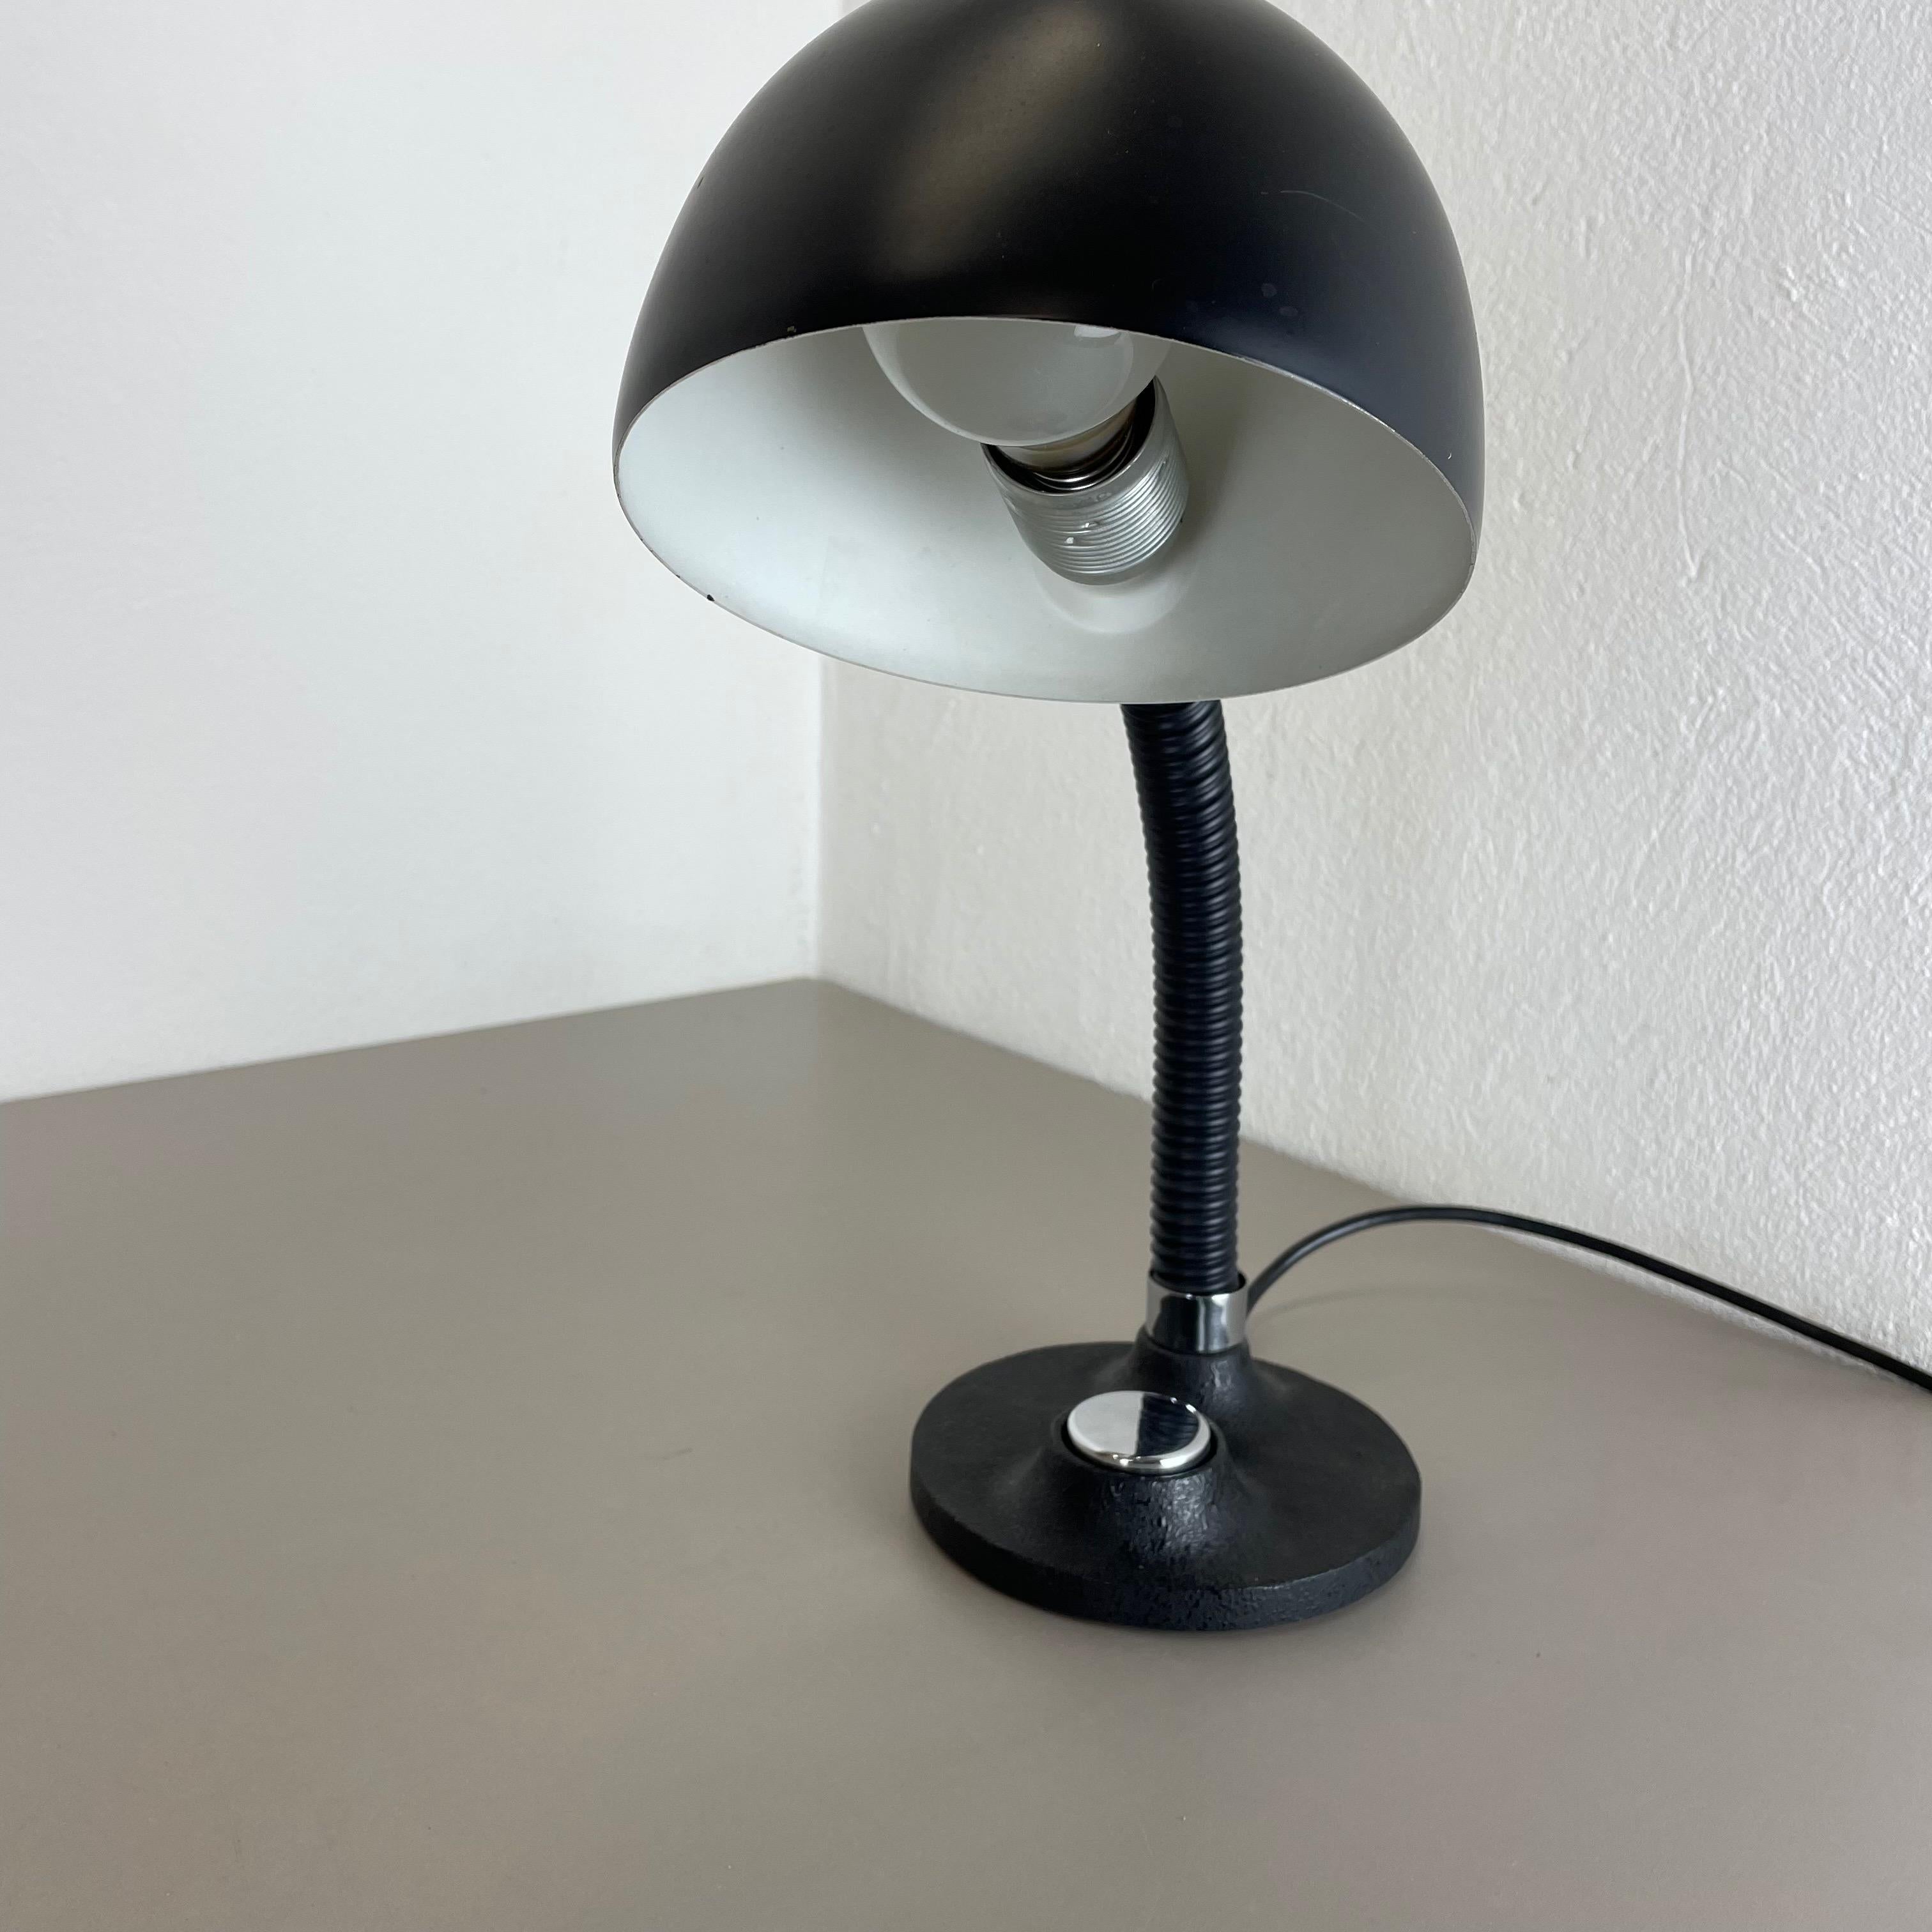 Modernist SPACE AGE Metal Table Light by Hillebrand Leuchten, Germany, 1970s For Sale 1